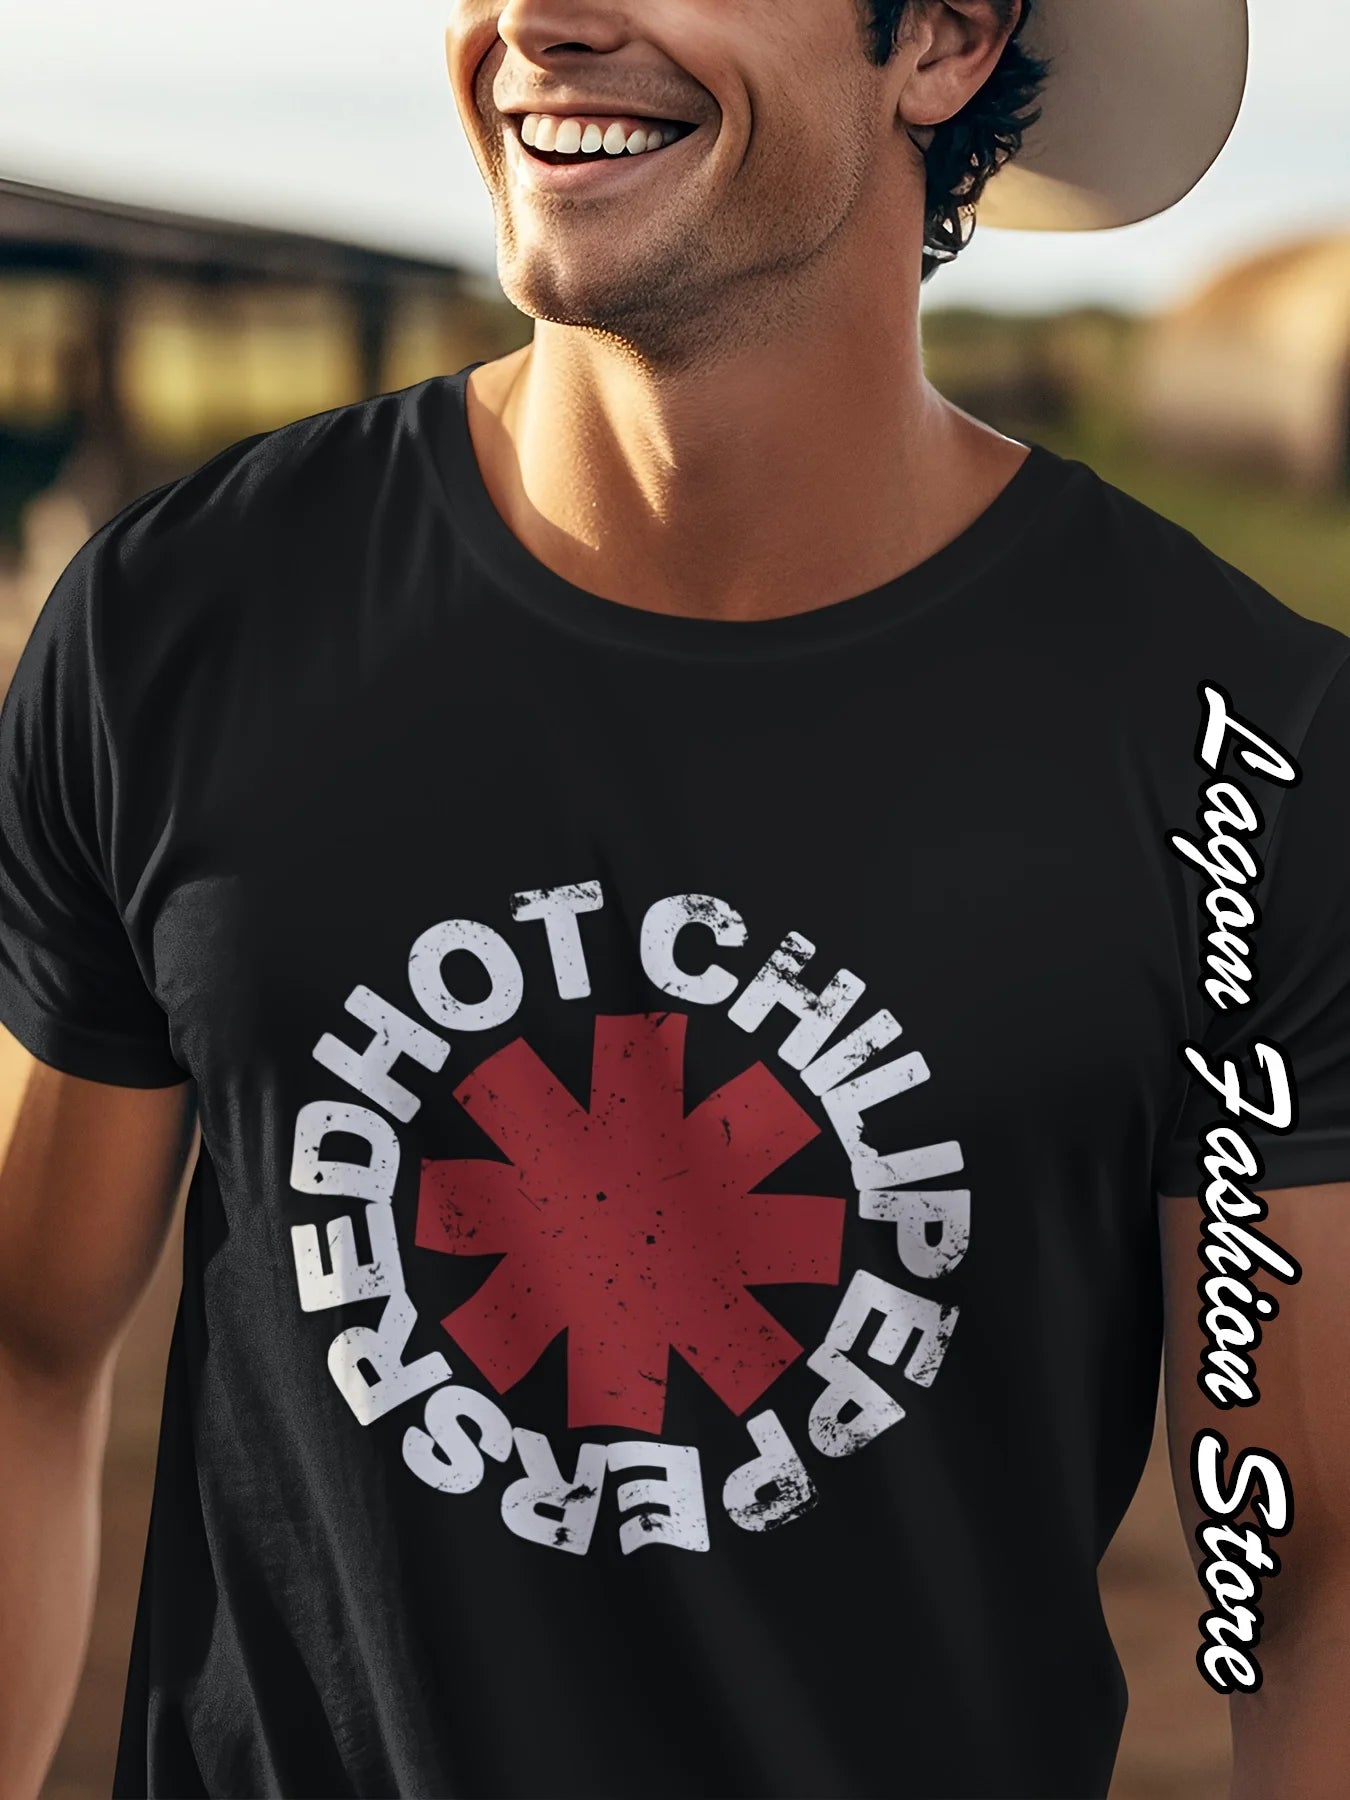 Red Hot Chili Peppers Print Cotton T-Shirt - Men’s Summer Rock Band Fashion Tee